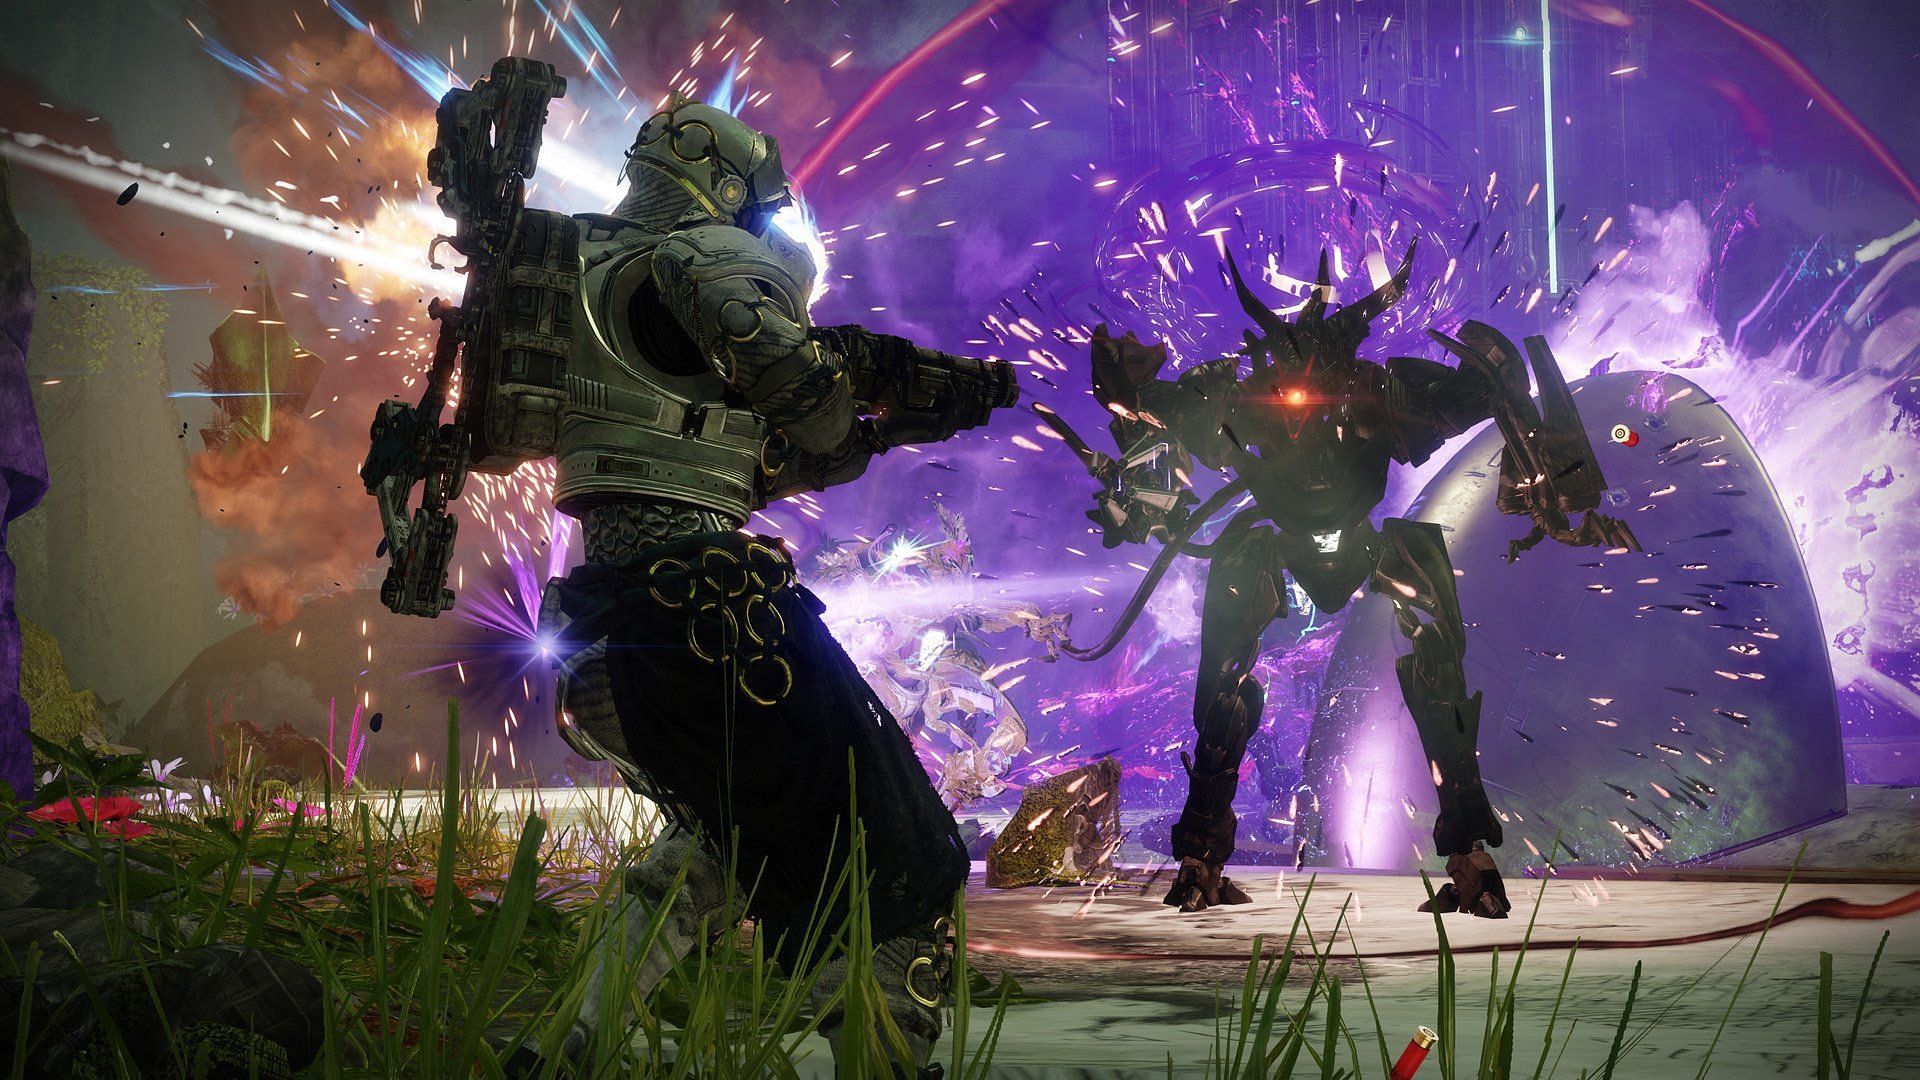 Elemental buffs and debuffs can be used to stun Champions in Destiny 2 Lightfall